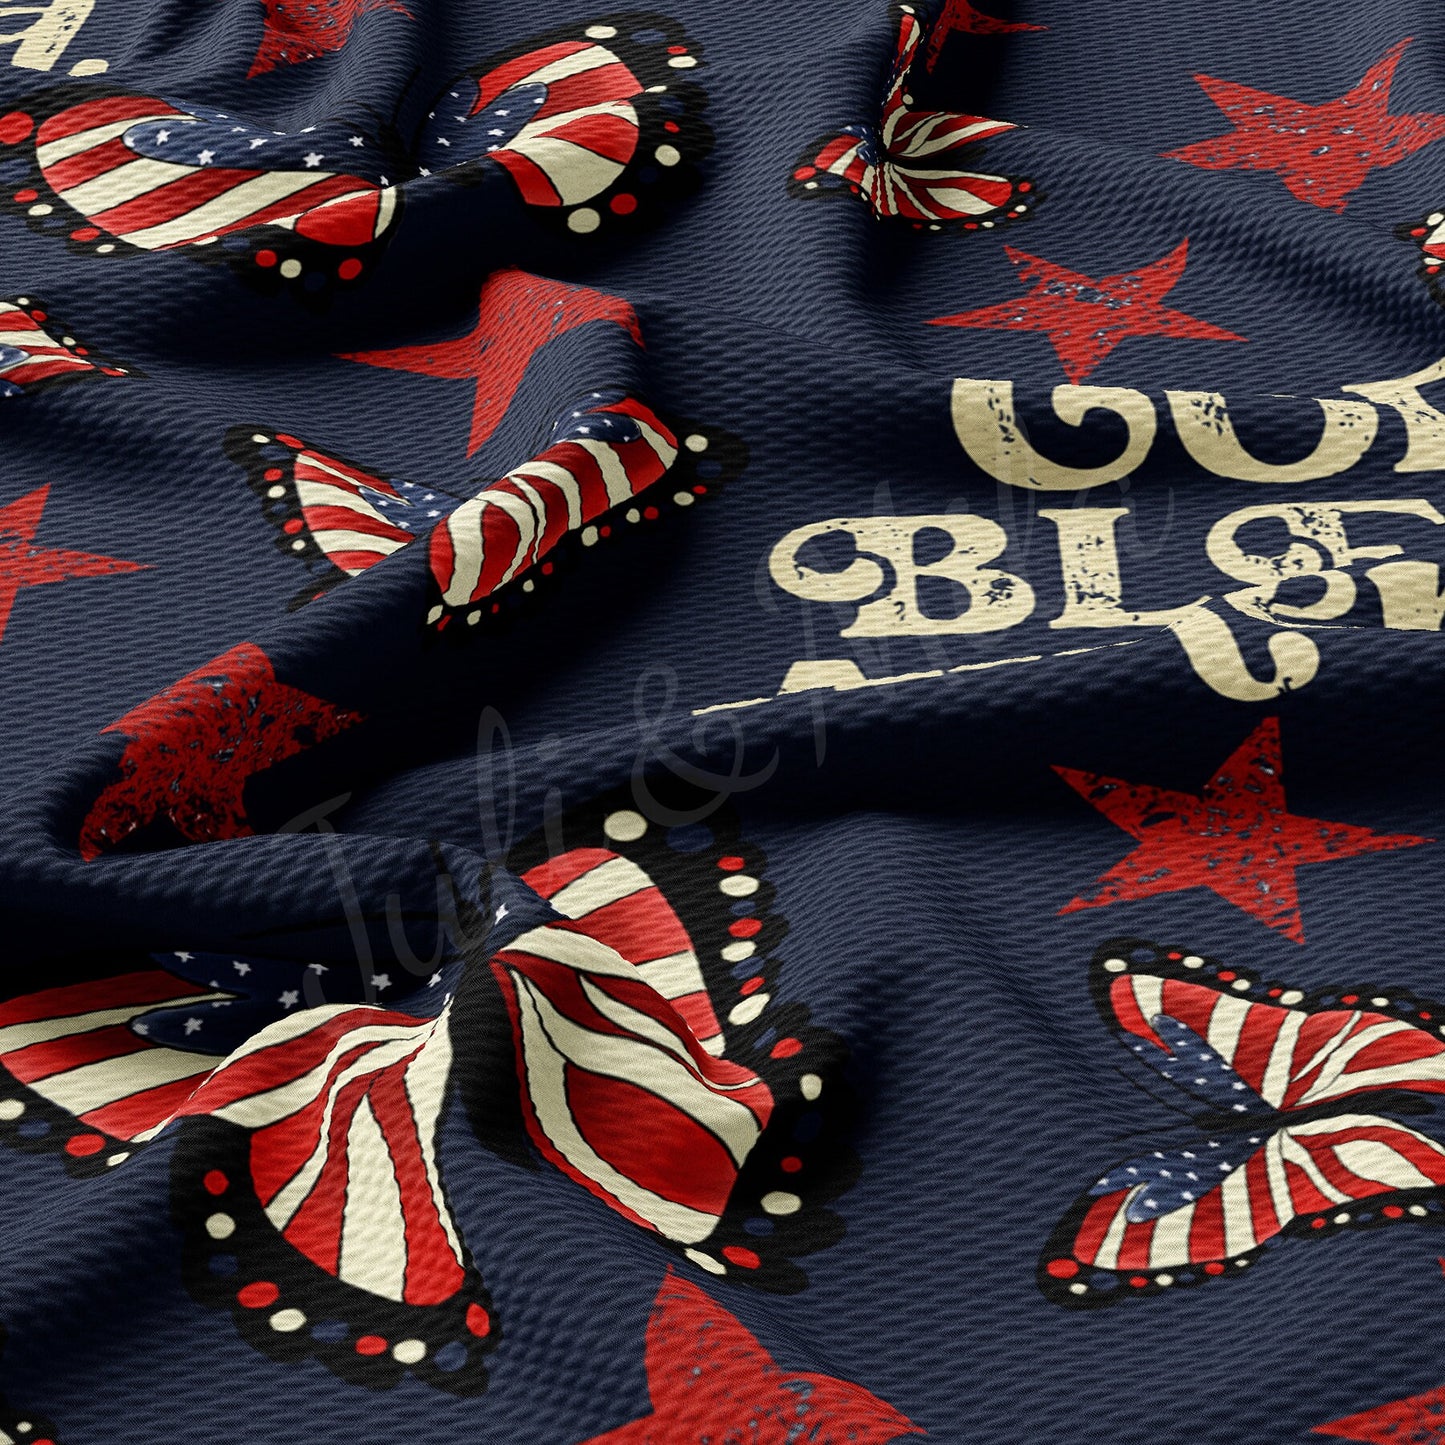 God Bless America 4th of July Bullet Textured Fabric  AA1501